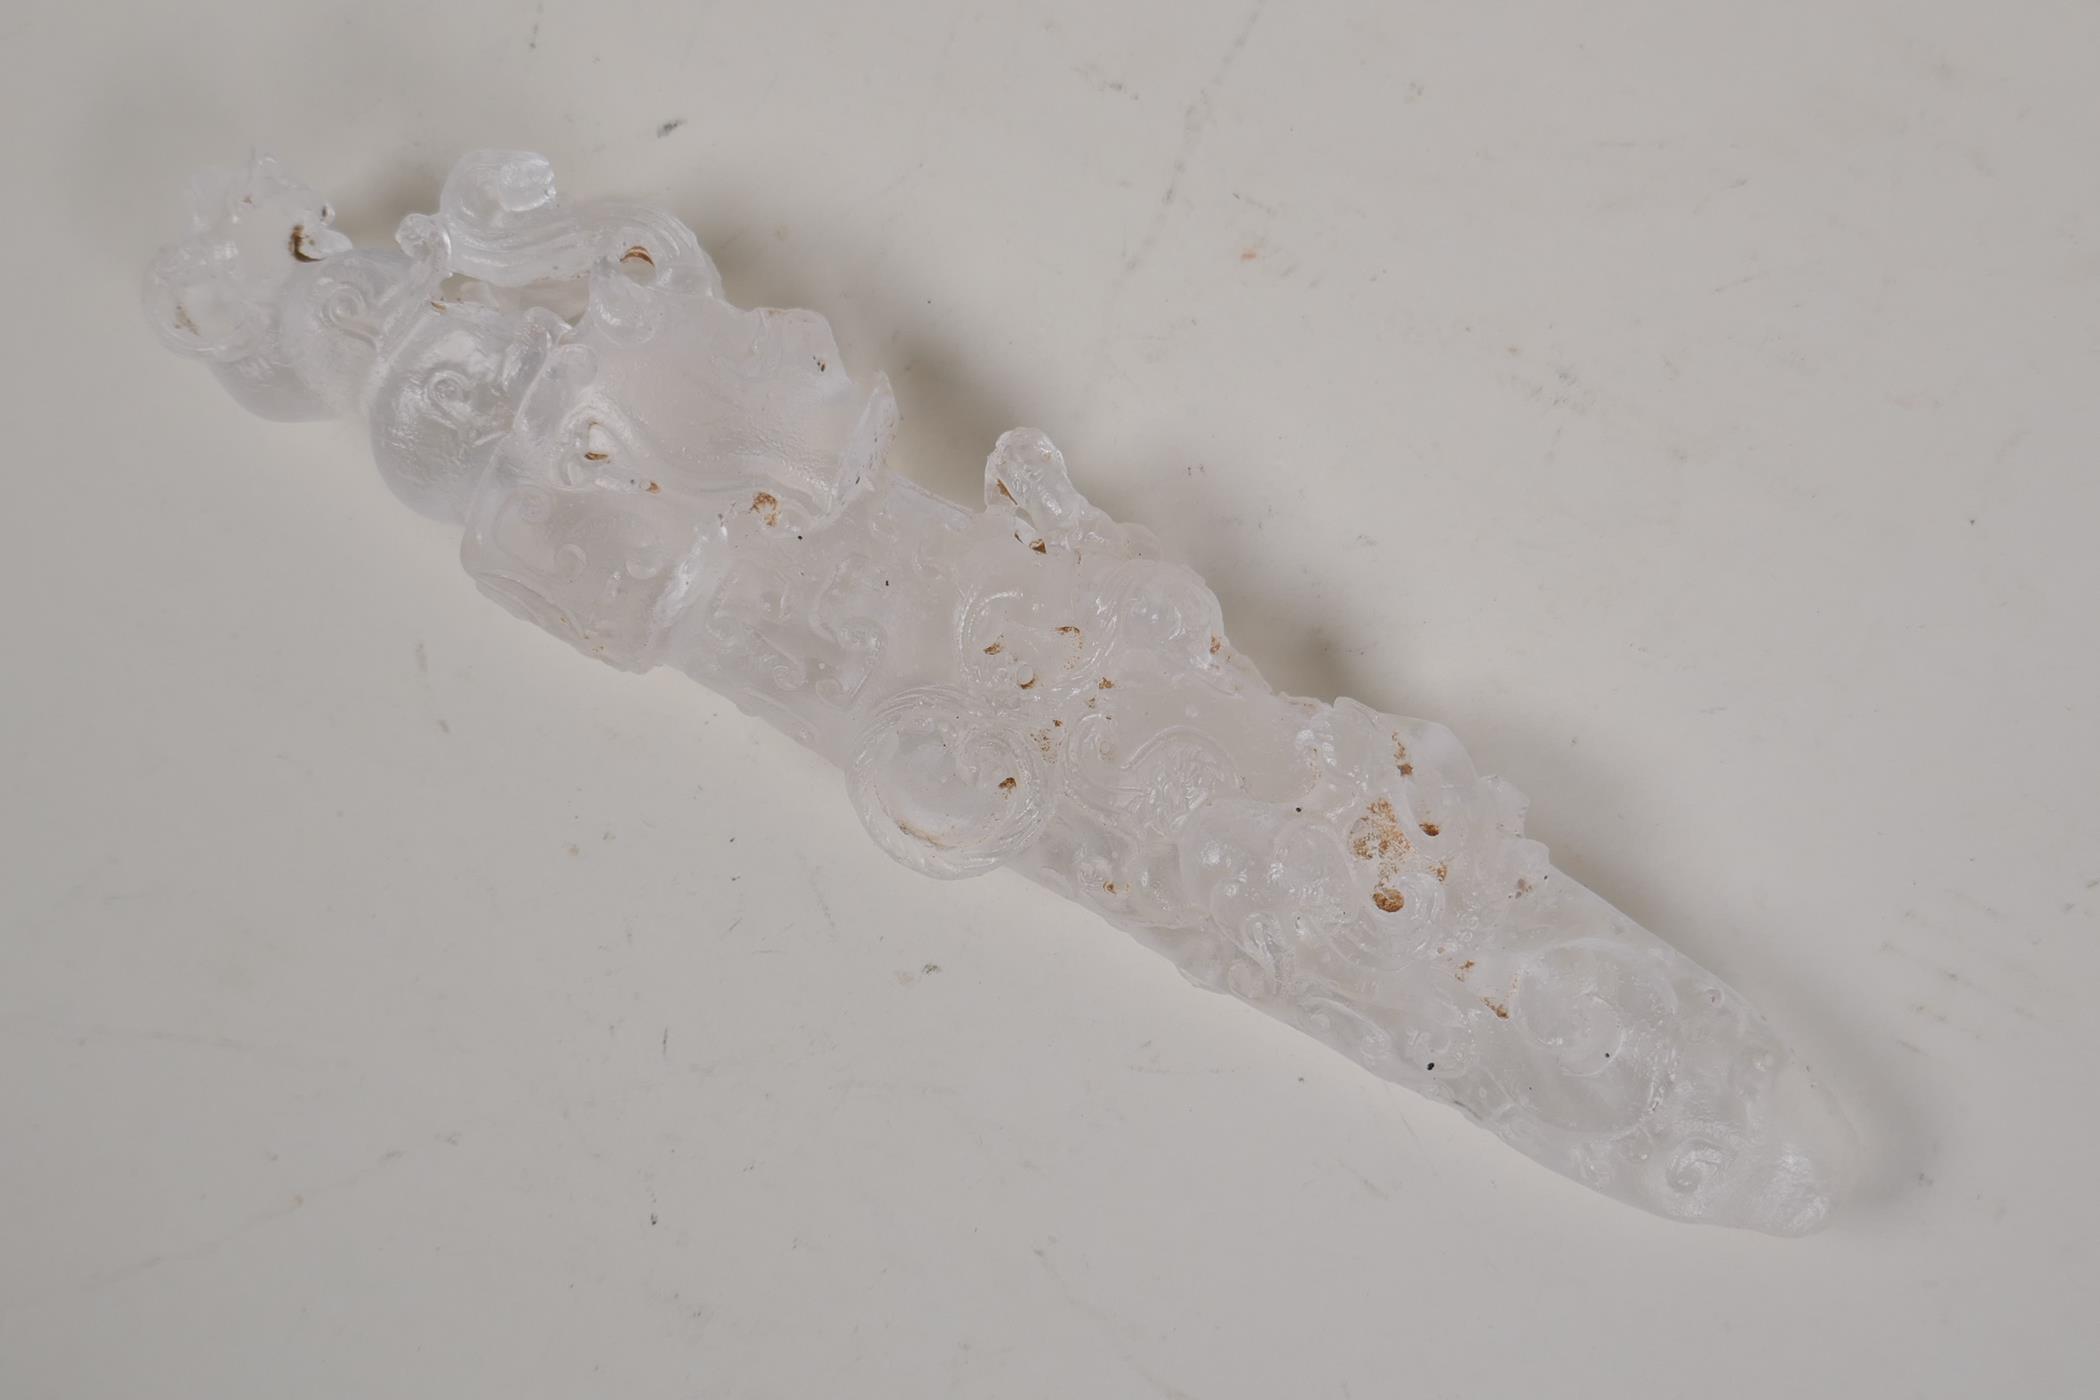 A Chinese moulded glass/crystal dagger shaped ornament decorated with dragons, kylin and phoenix, 9" - Image 2 of 3